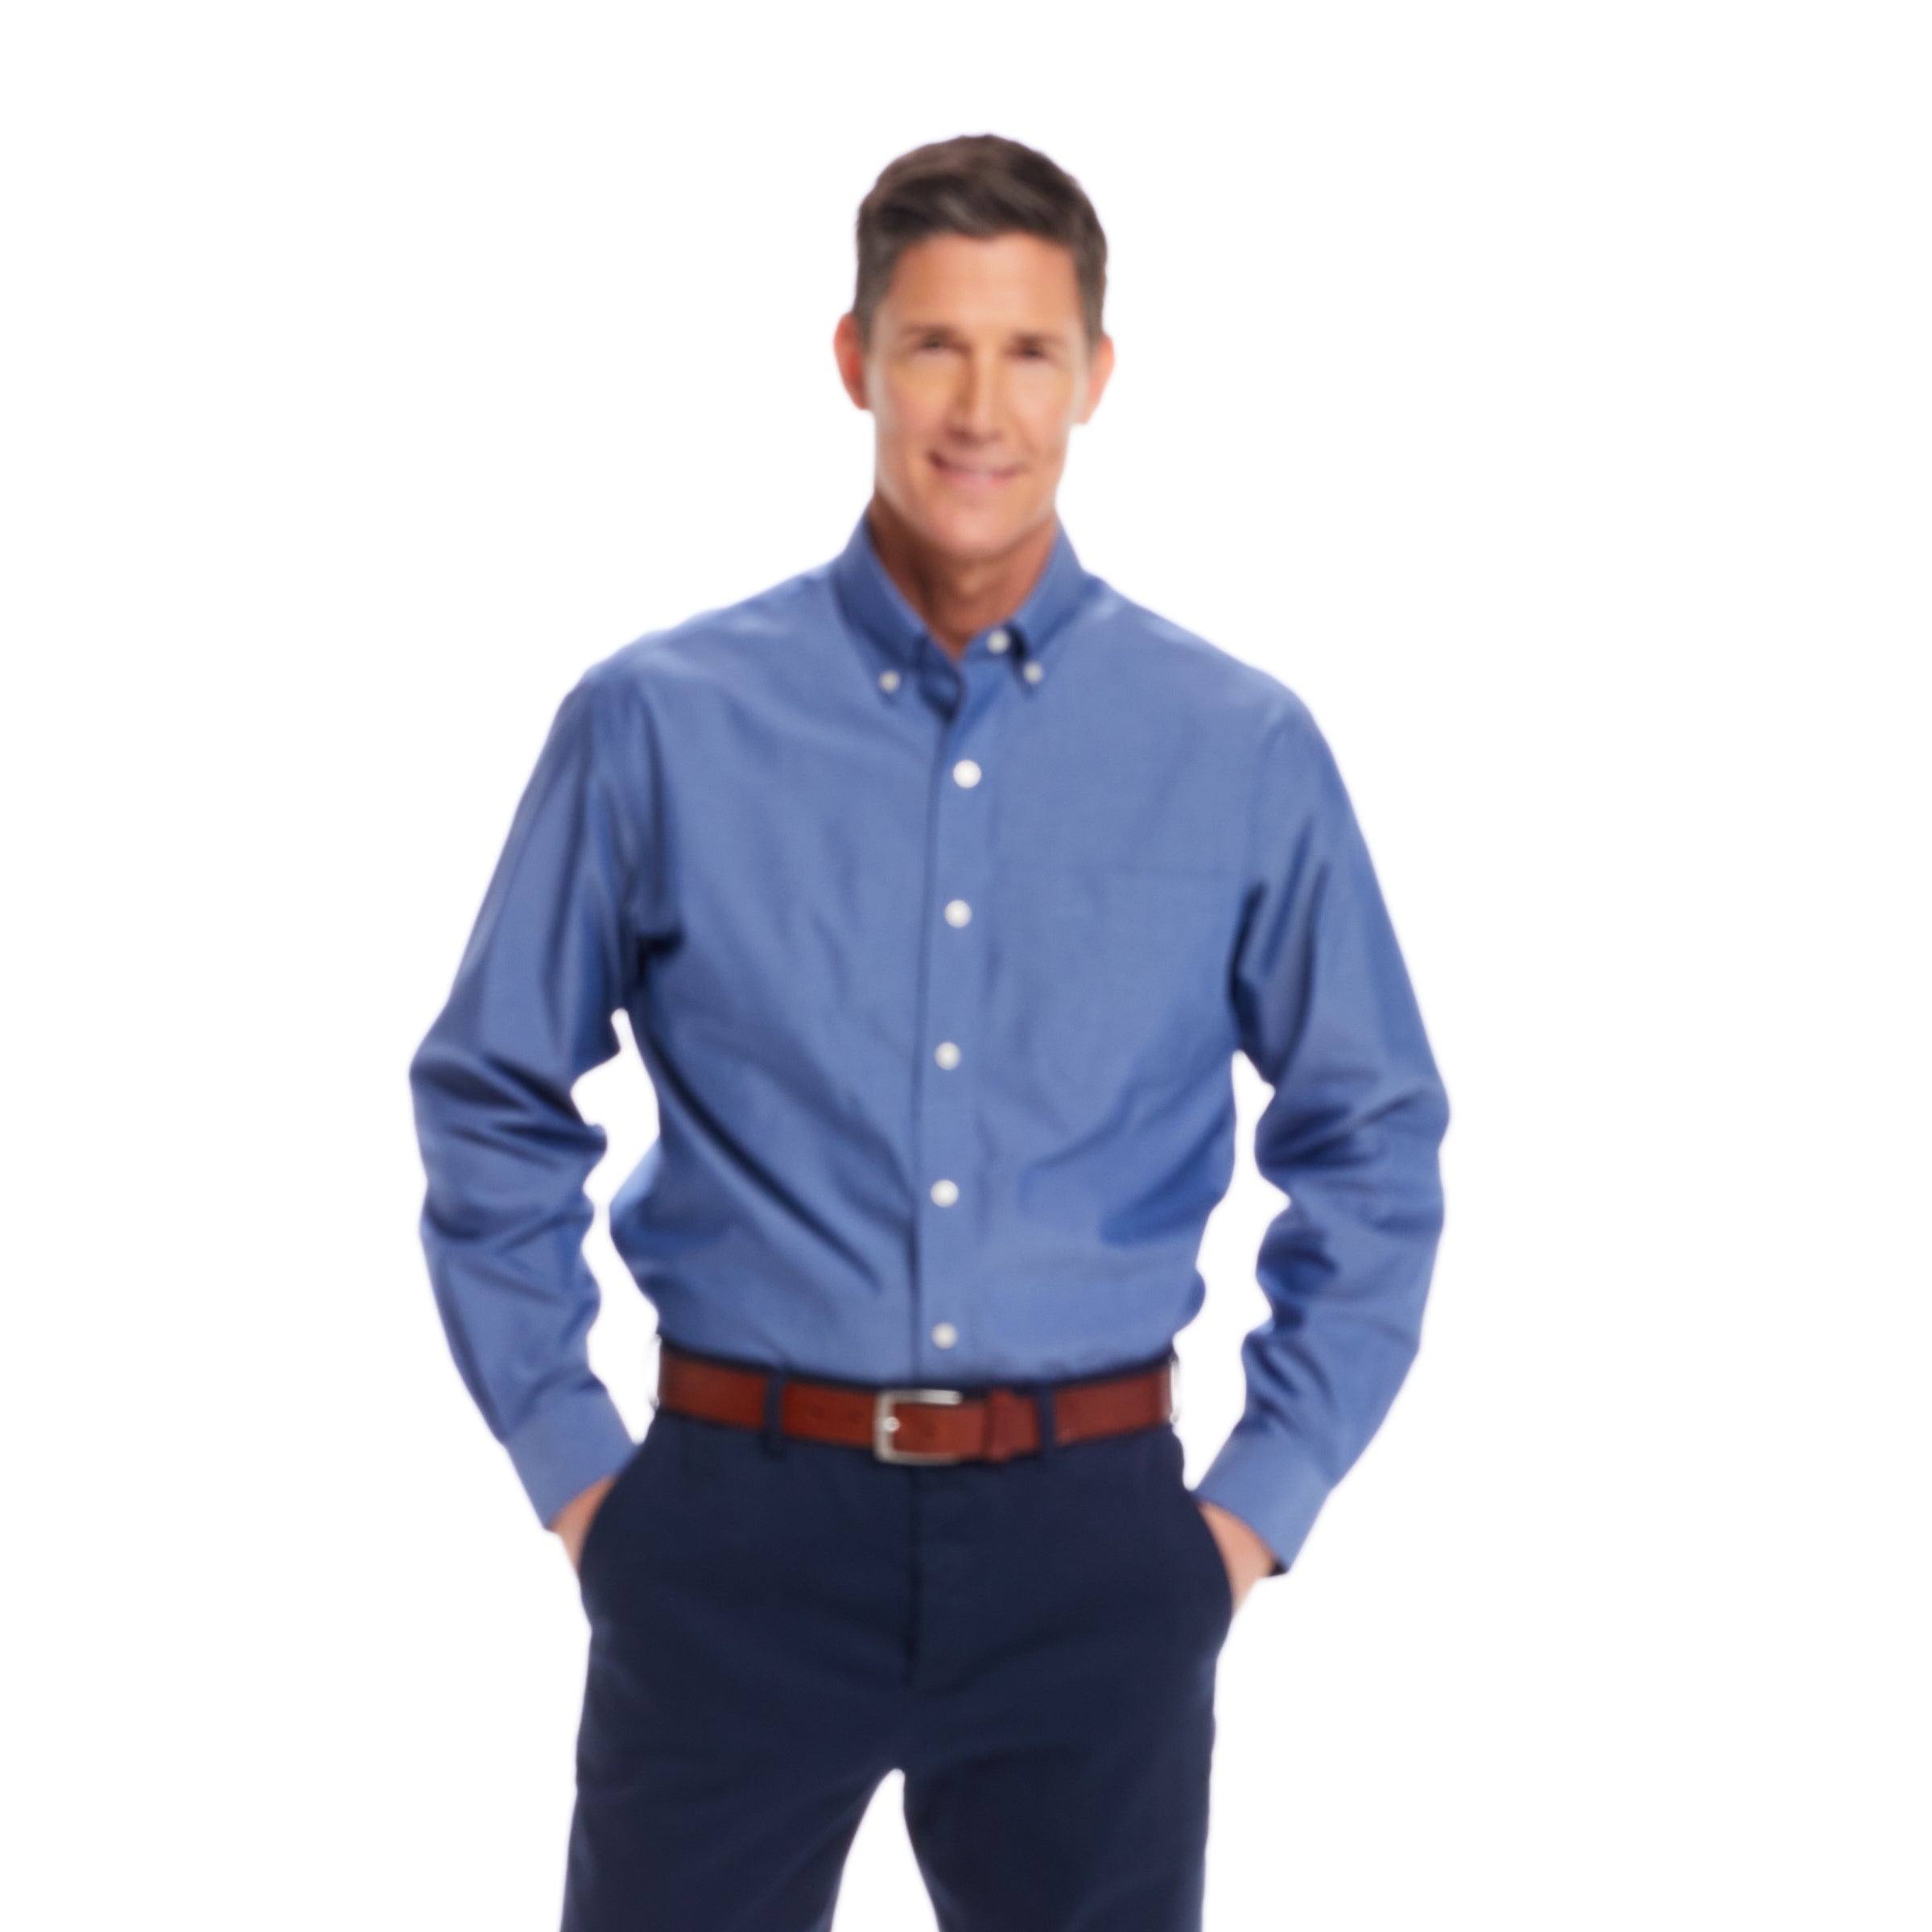 Long Sleeve Blue Chambray Shirt with Magnetic Closures